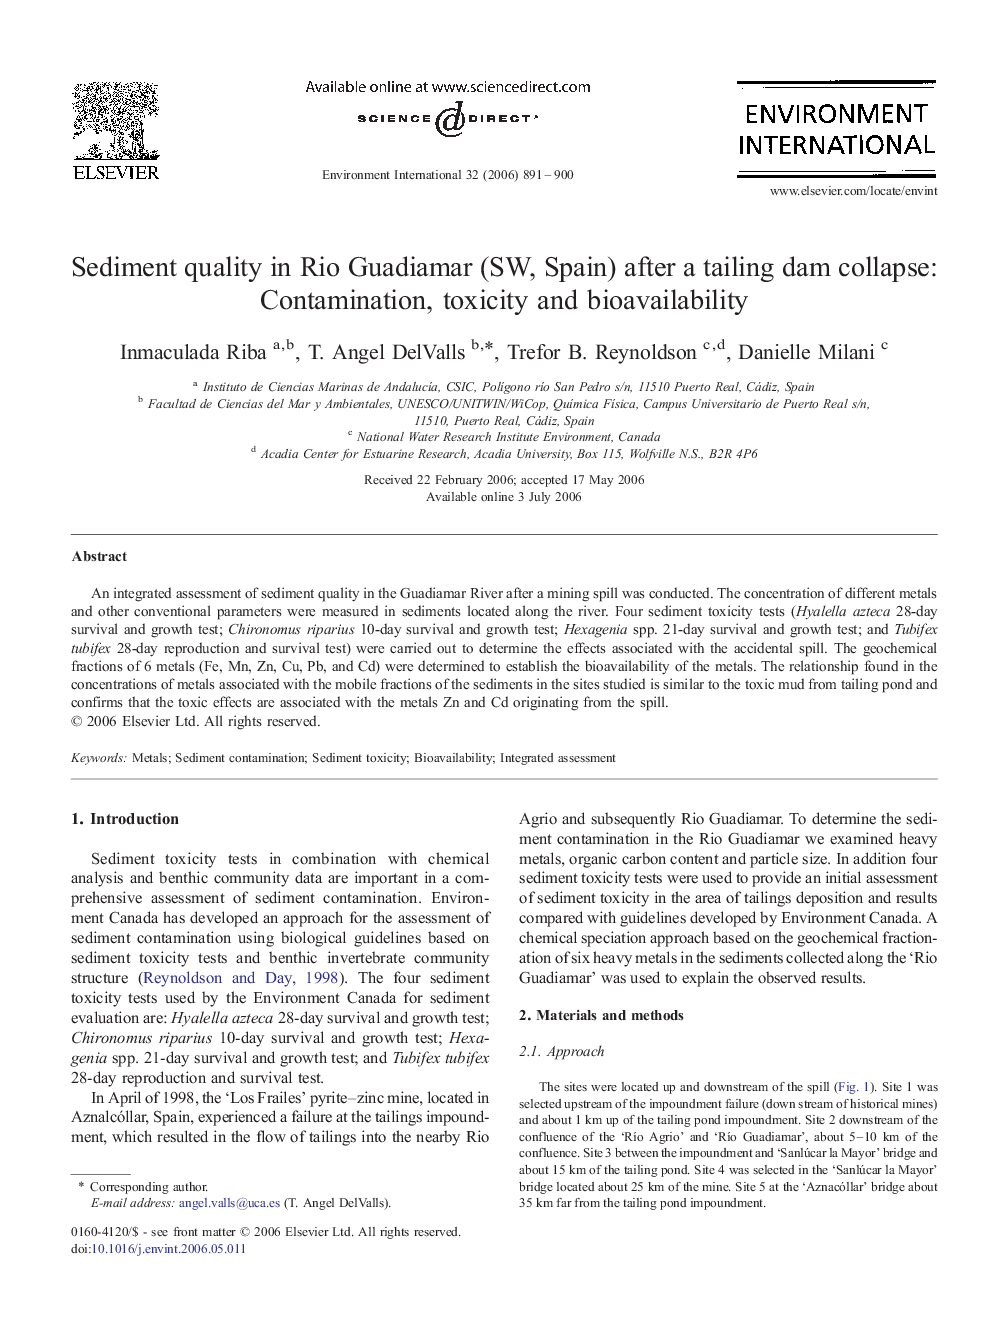 Sediment quality in Rio Guadiamar (SW, Spain) after a tailing dam collapse: Contamination, toxicity and bioavailability